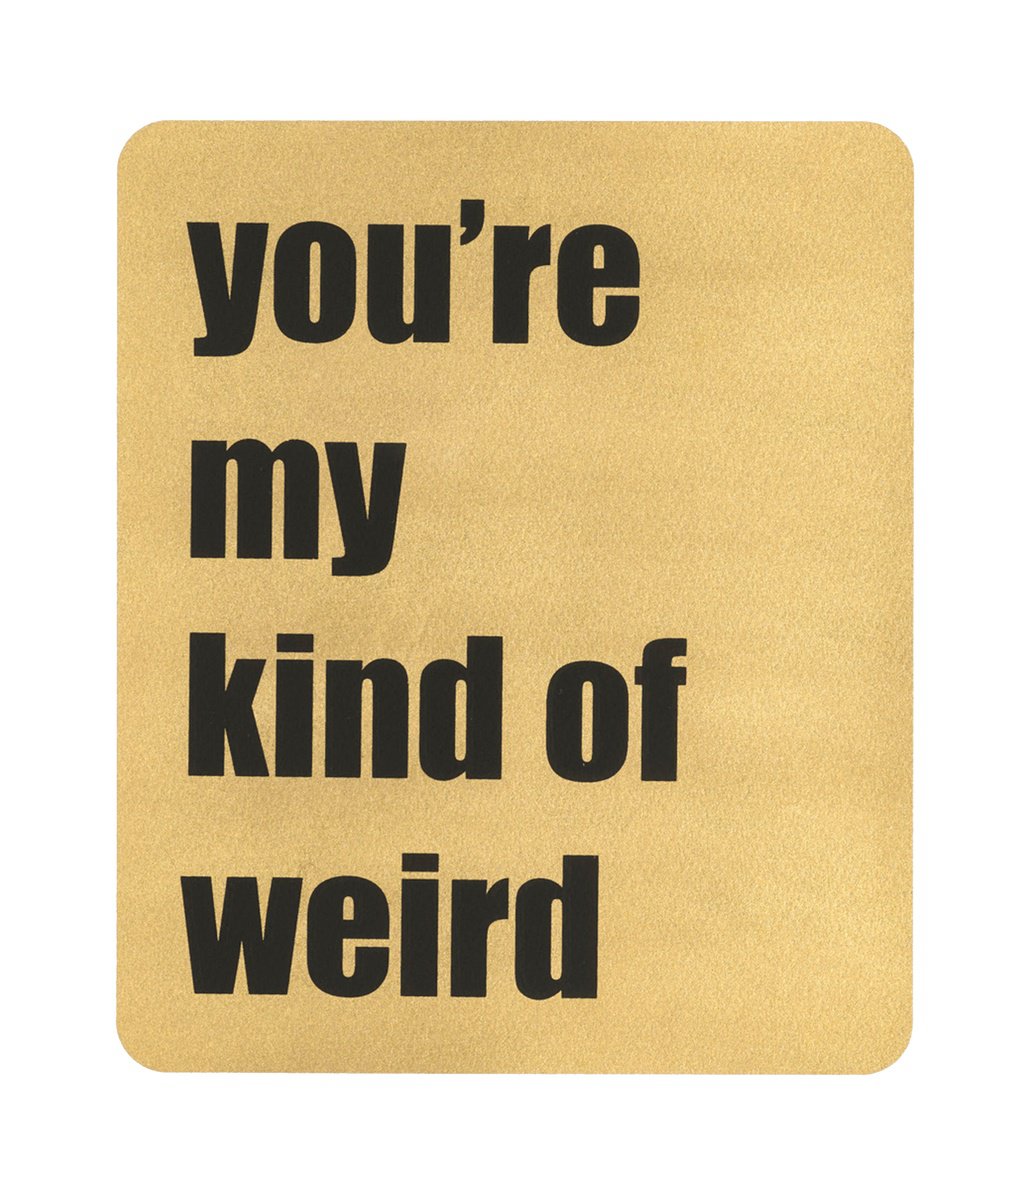 YOU’RE MY KIND OF WEIRD (Black) by AAWatson